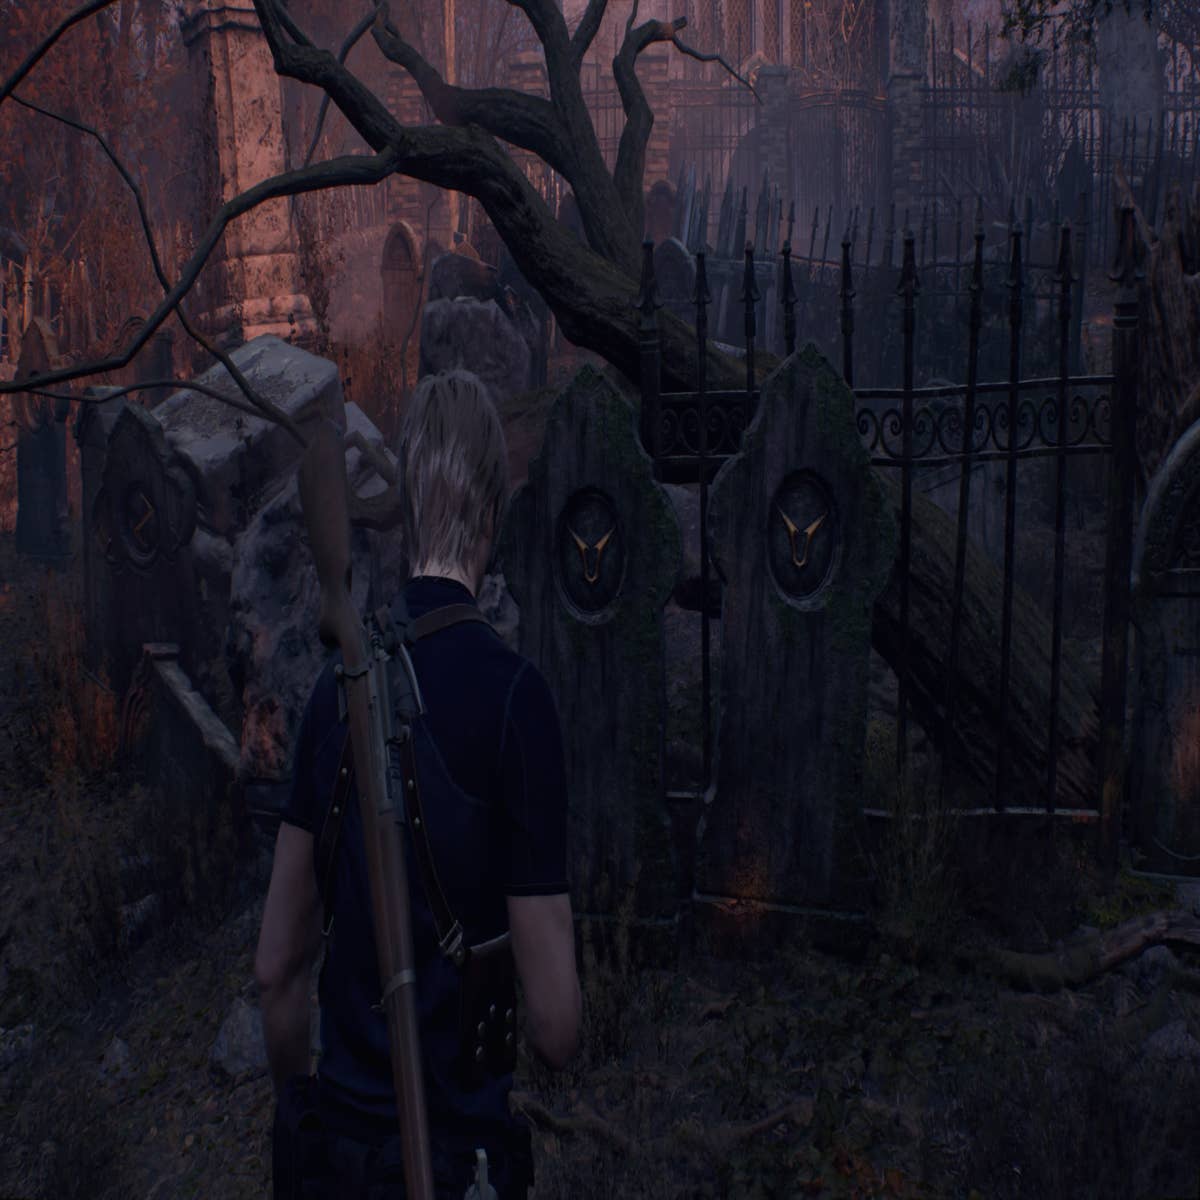 Resident Evil 4 Tombstone Emblems location: Where to destroy the twins'  gravestones